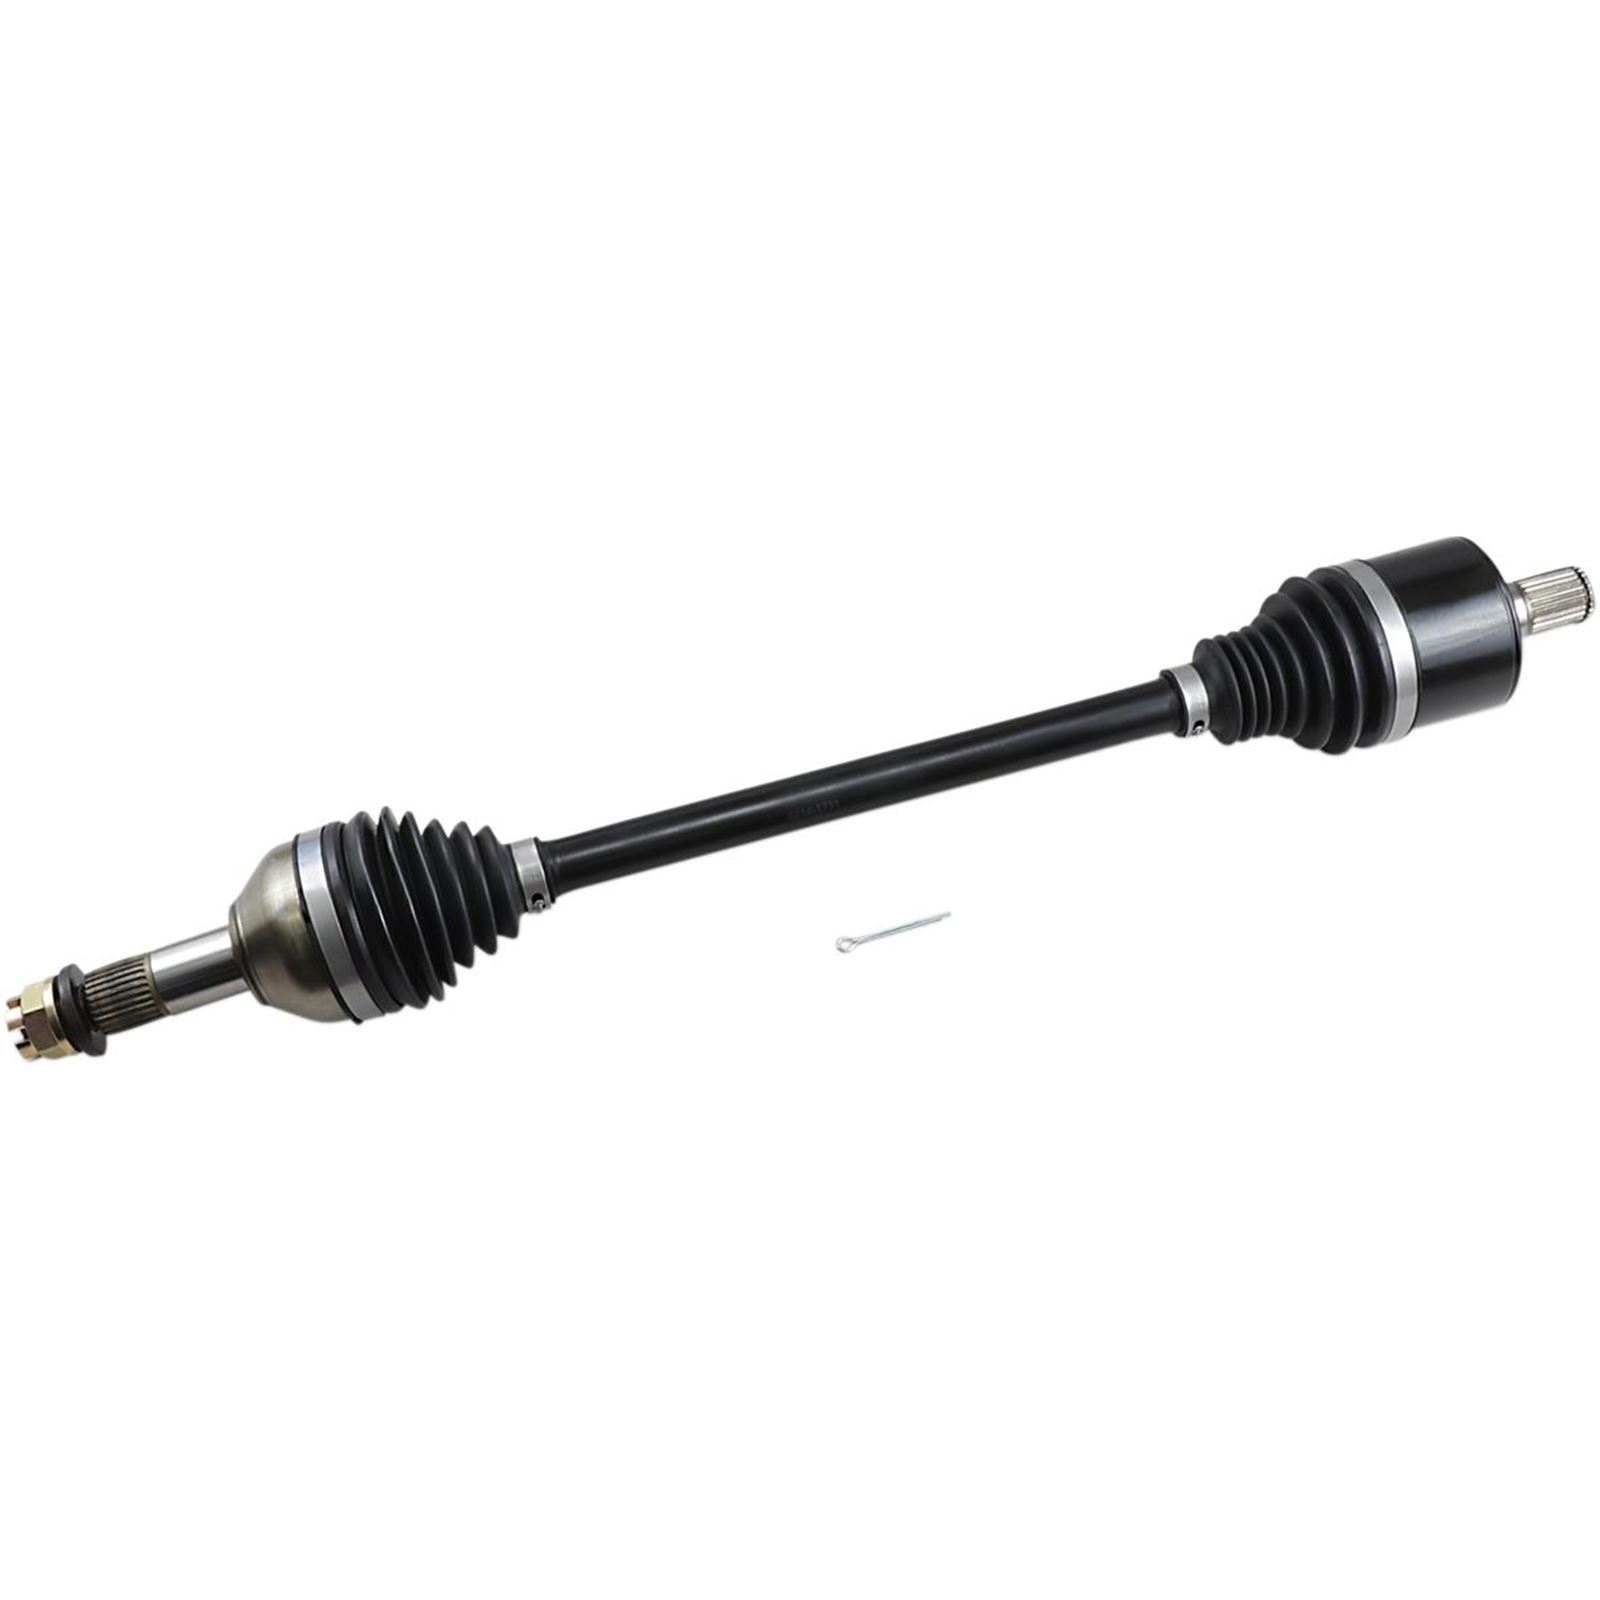 Moose Racing Complete Axle - Heavy Duty - Kit - Can-Am